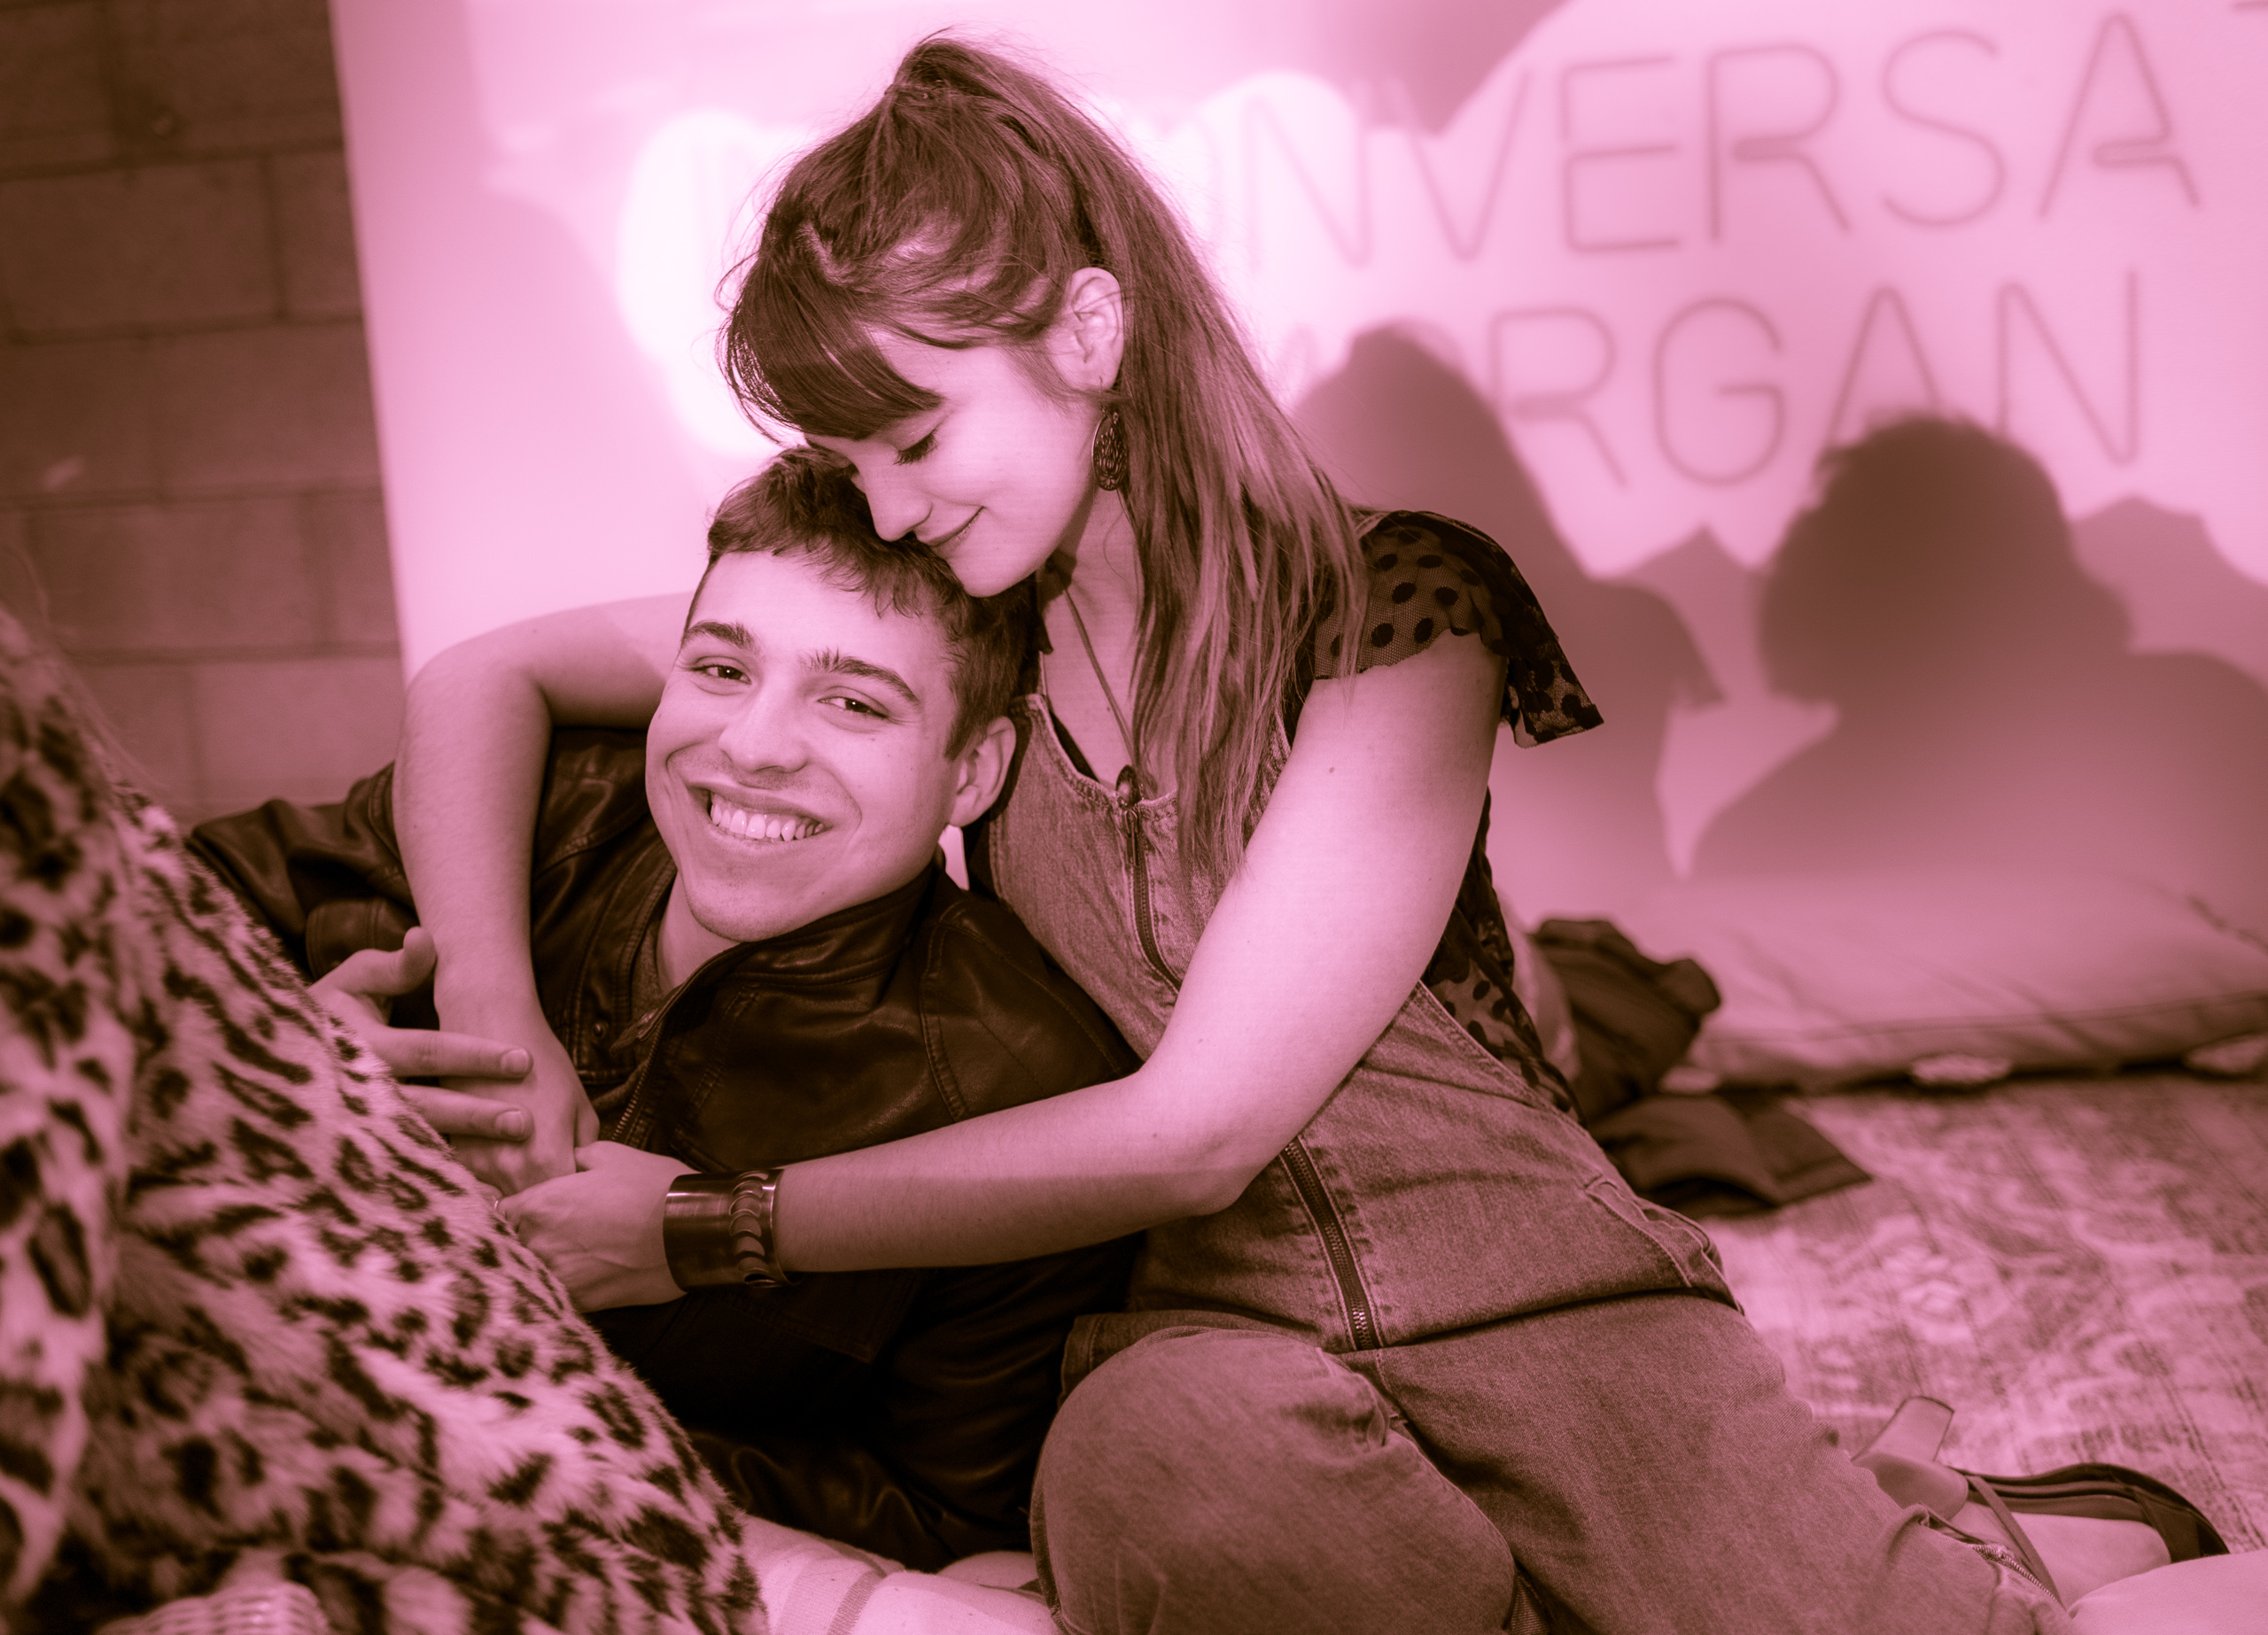 A couple embrace. A guy lays on a pillow, and a girl puts her arms around him and lays her cheek on his head.